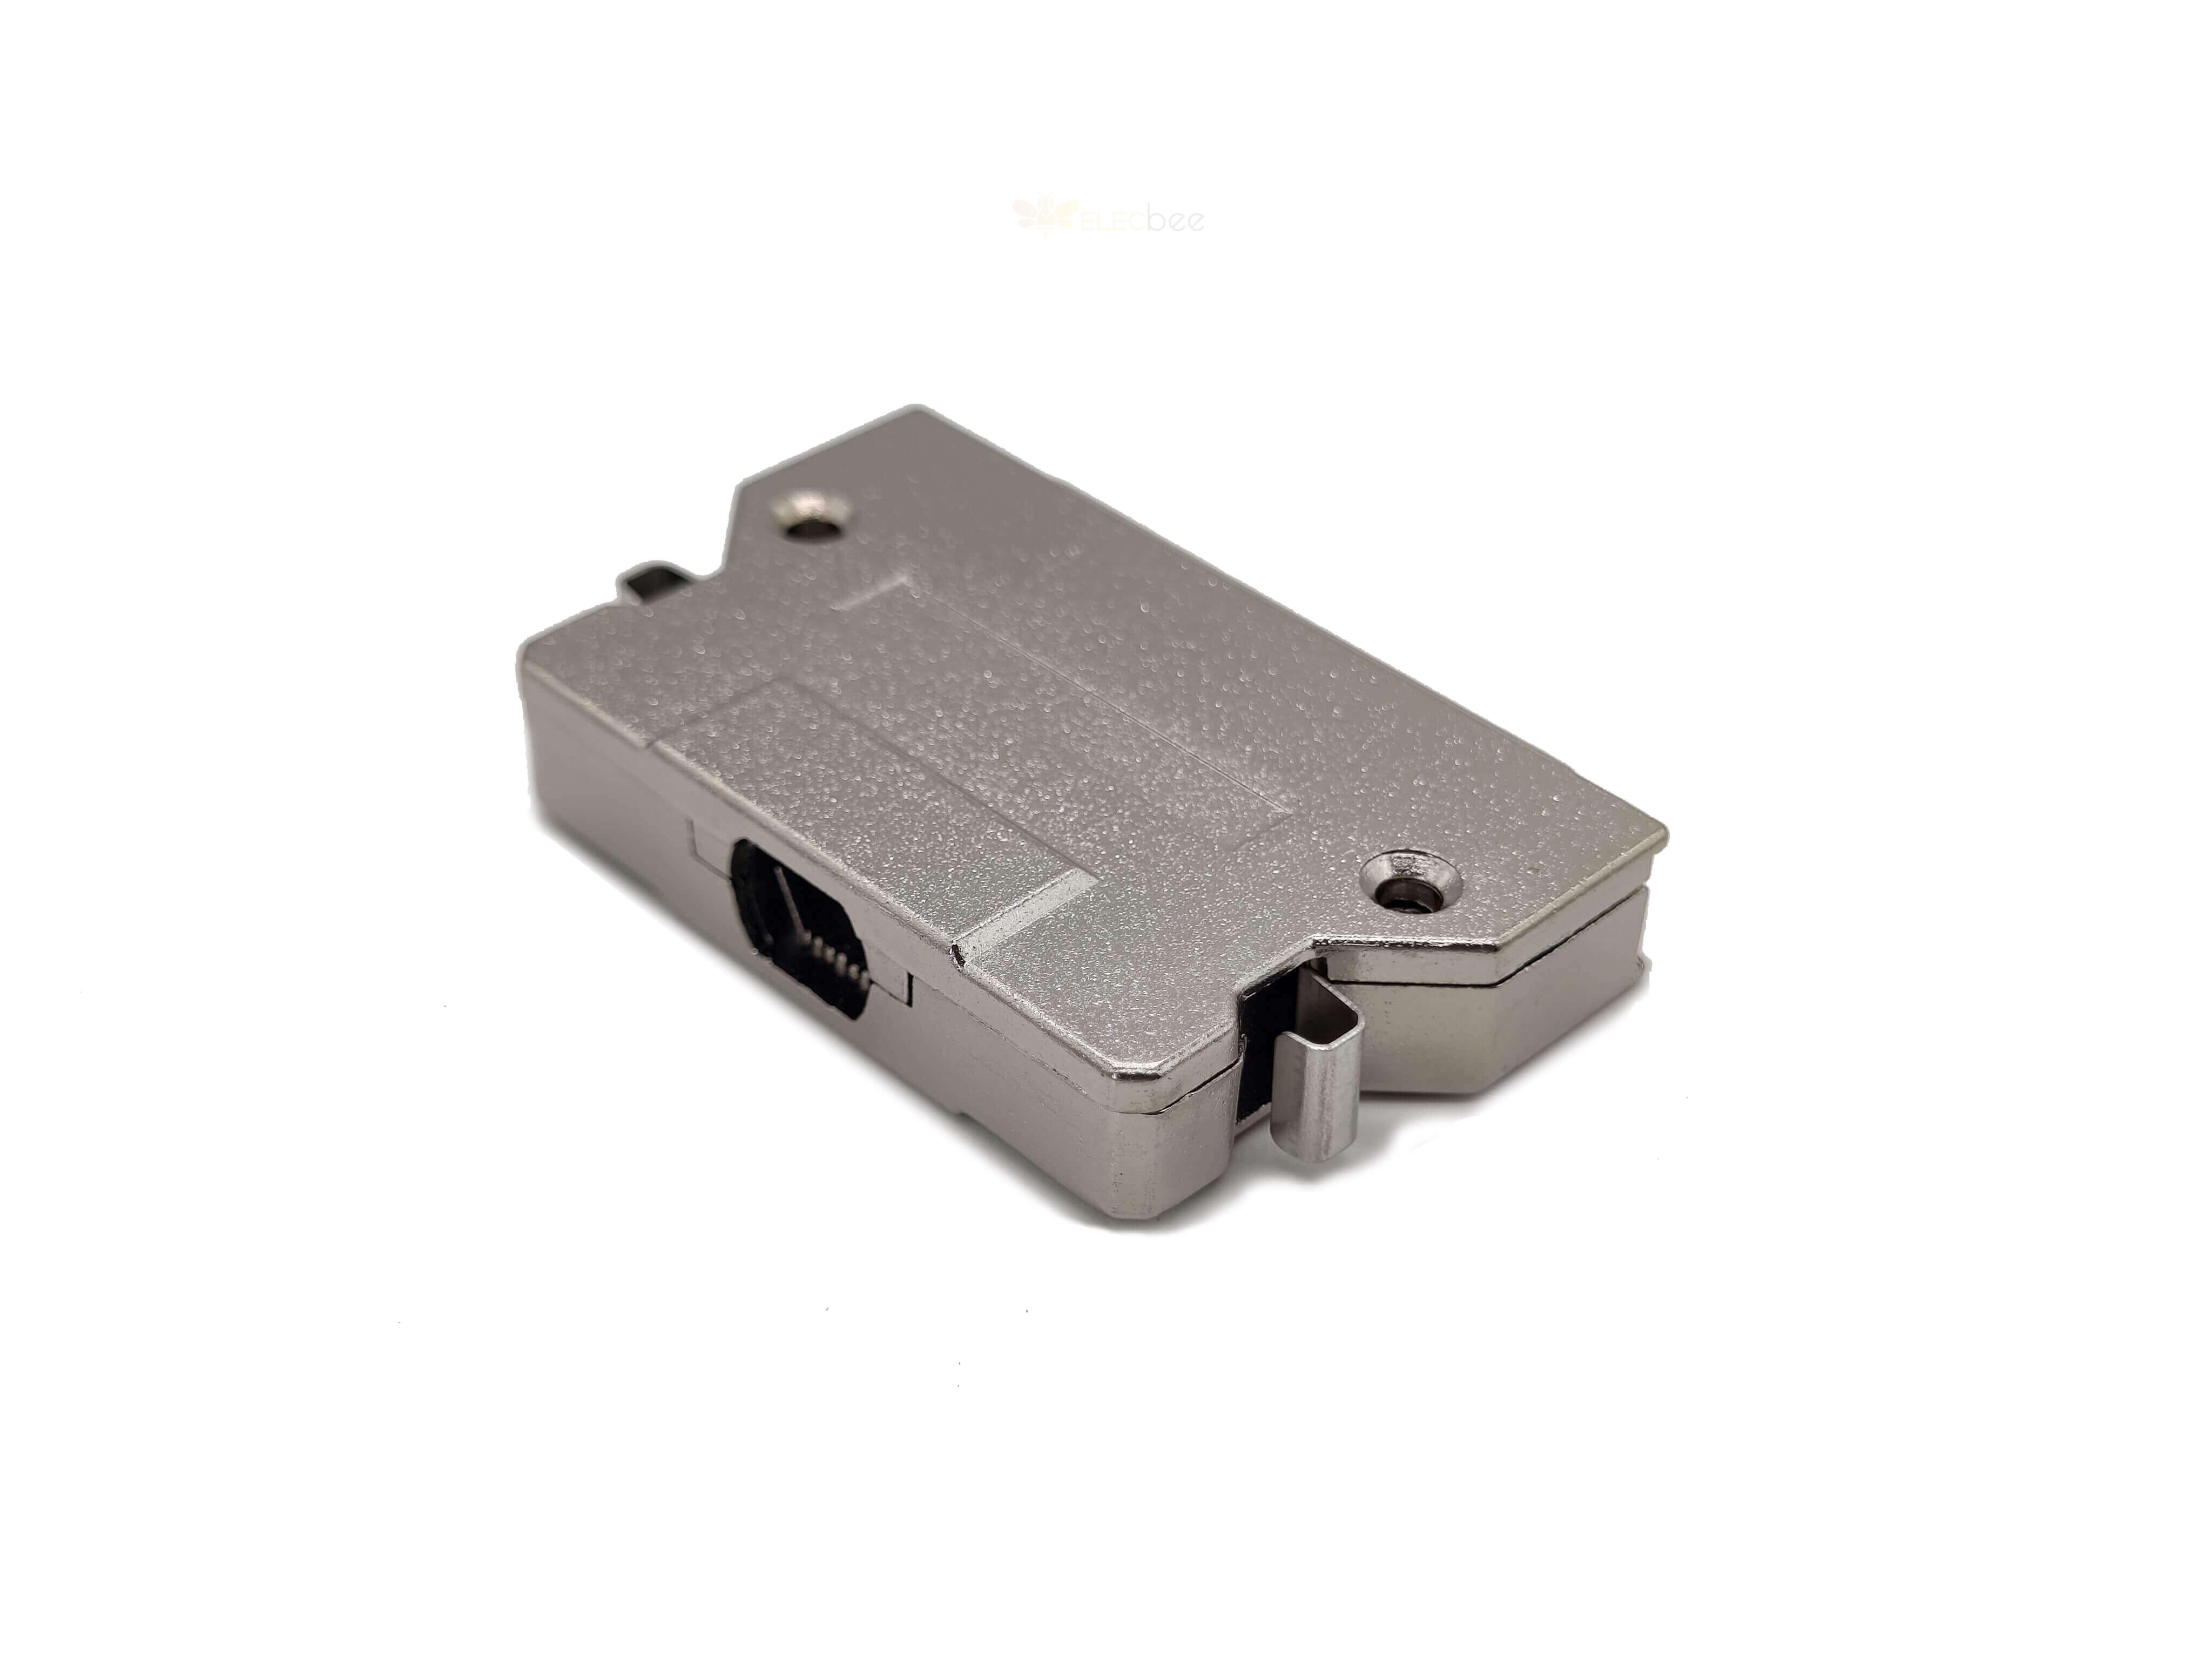 SCSI 68 Pin HPDB Type Female Connector Latch Lock Metal Shell 1.27mm Pitch IDC Type for Cable